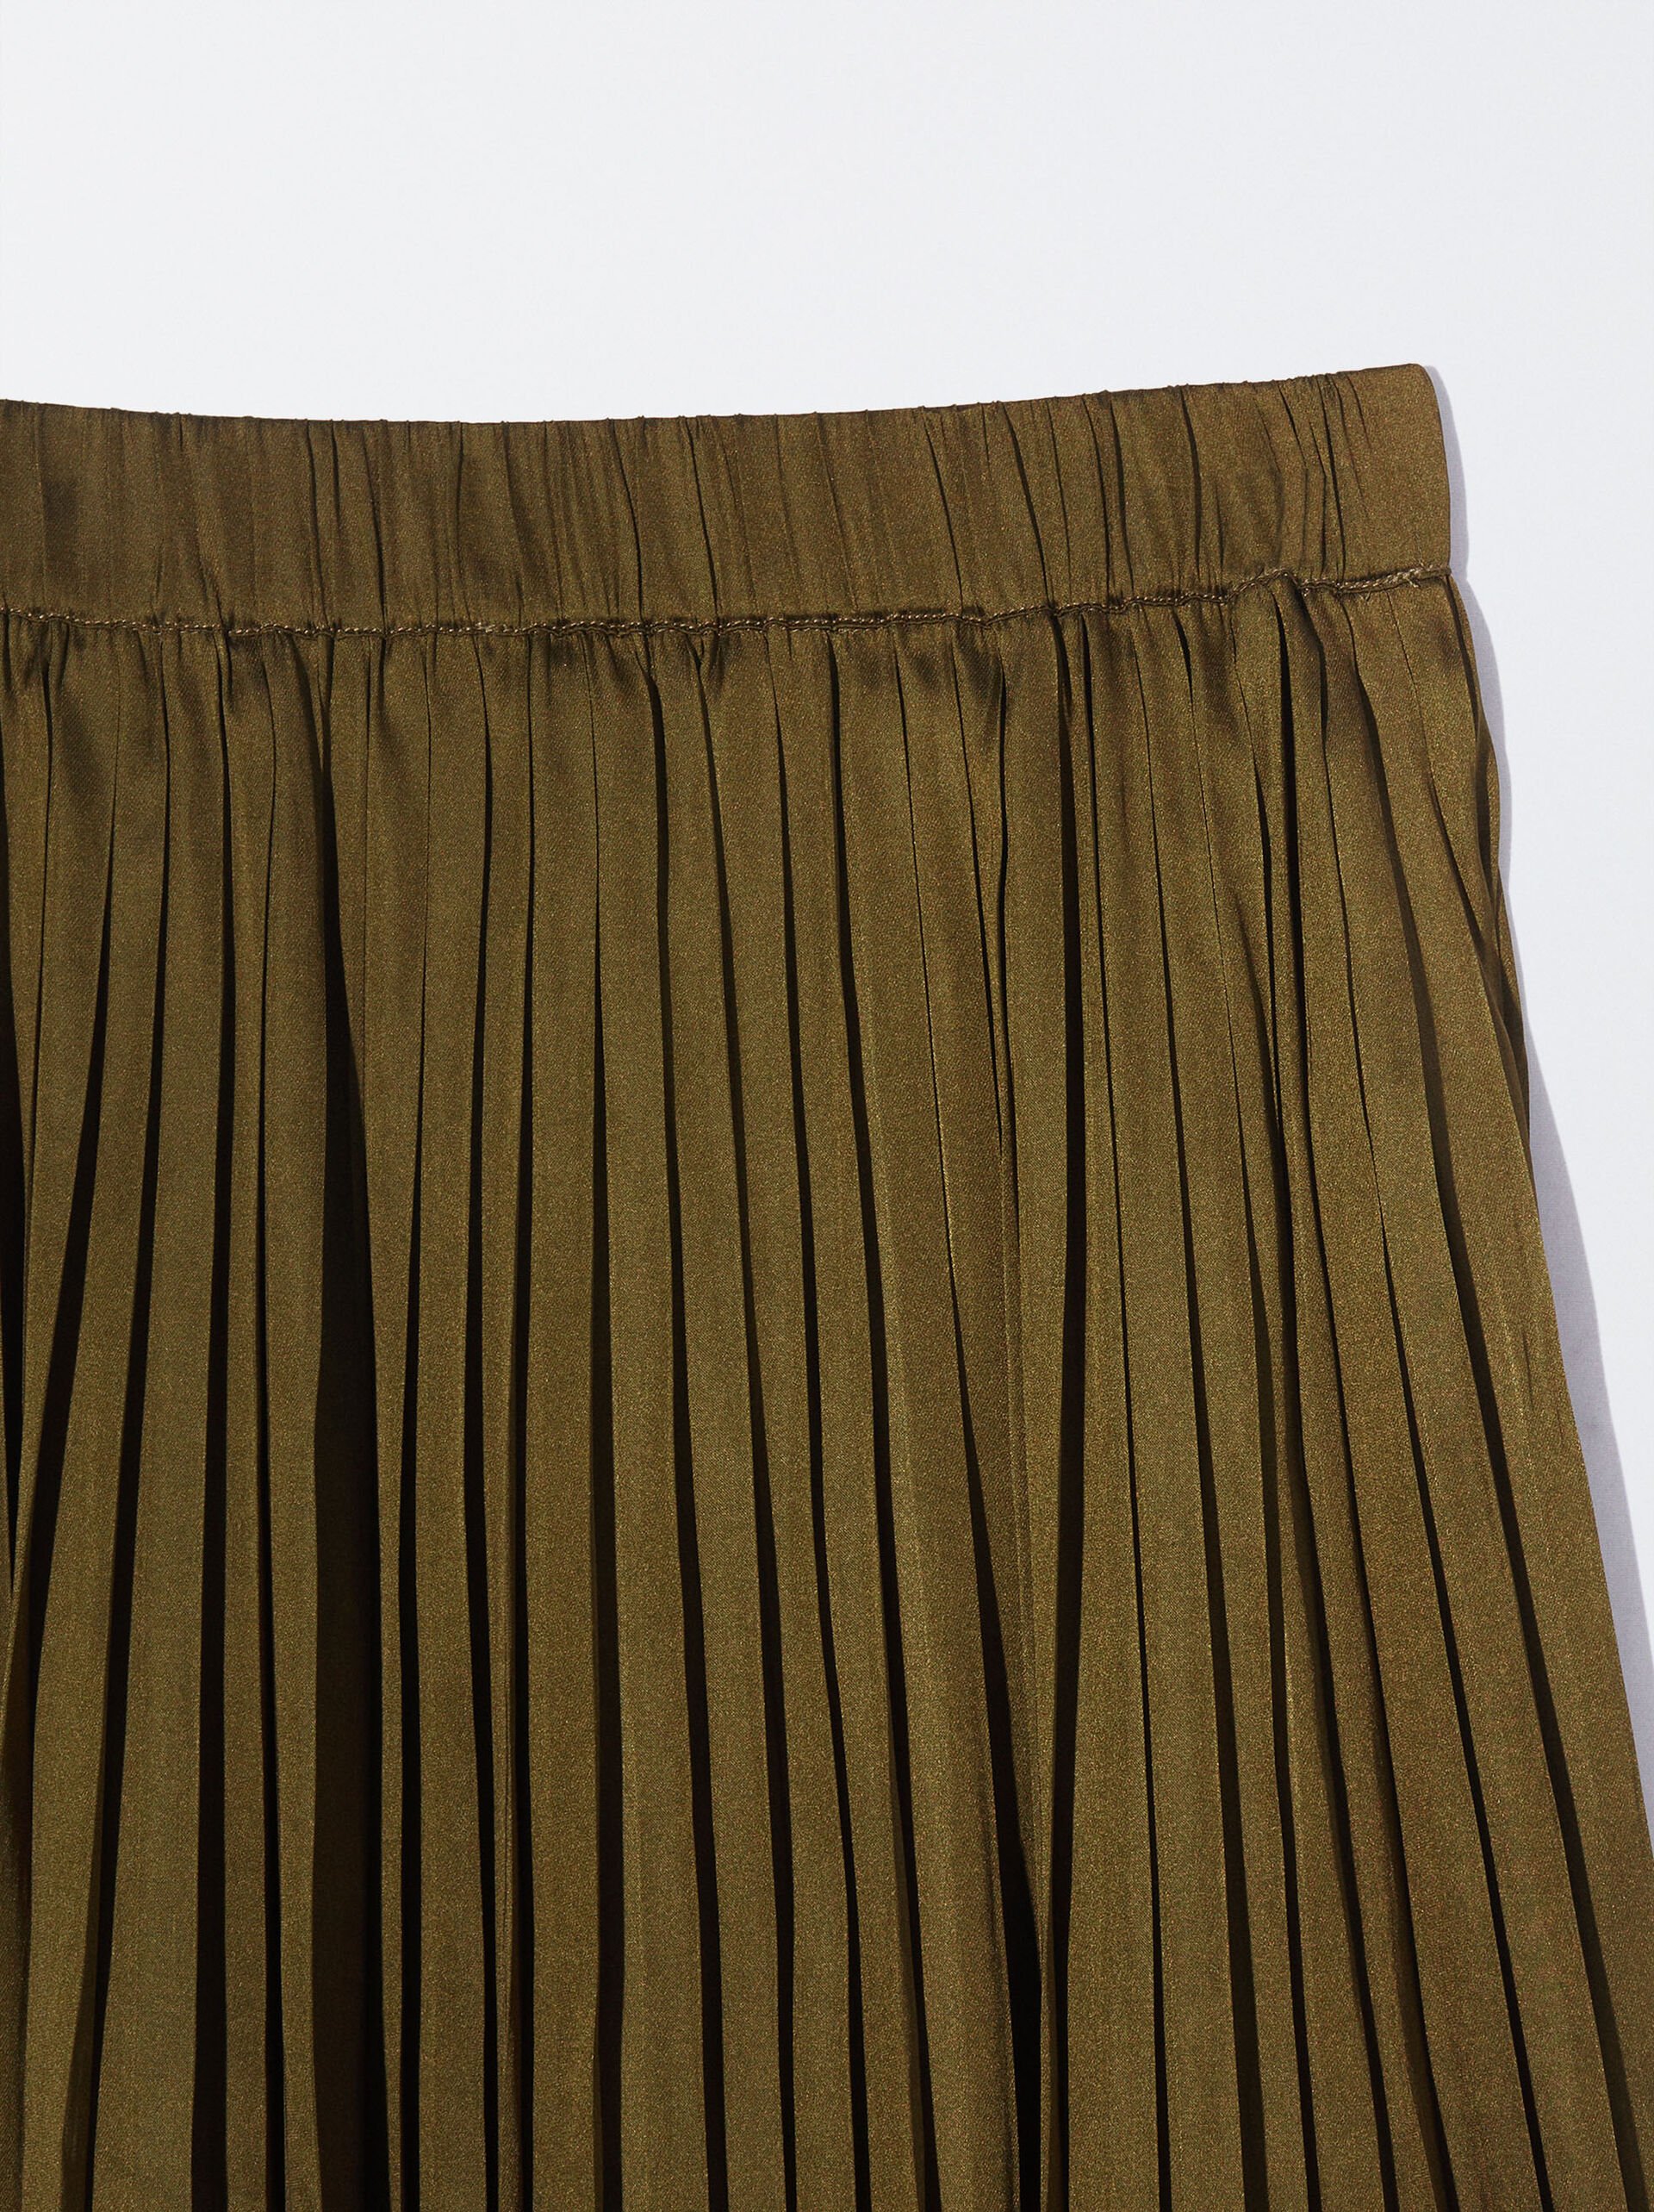 Long Pleated Skirt image number 6.0